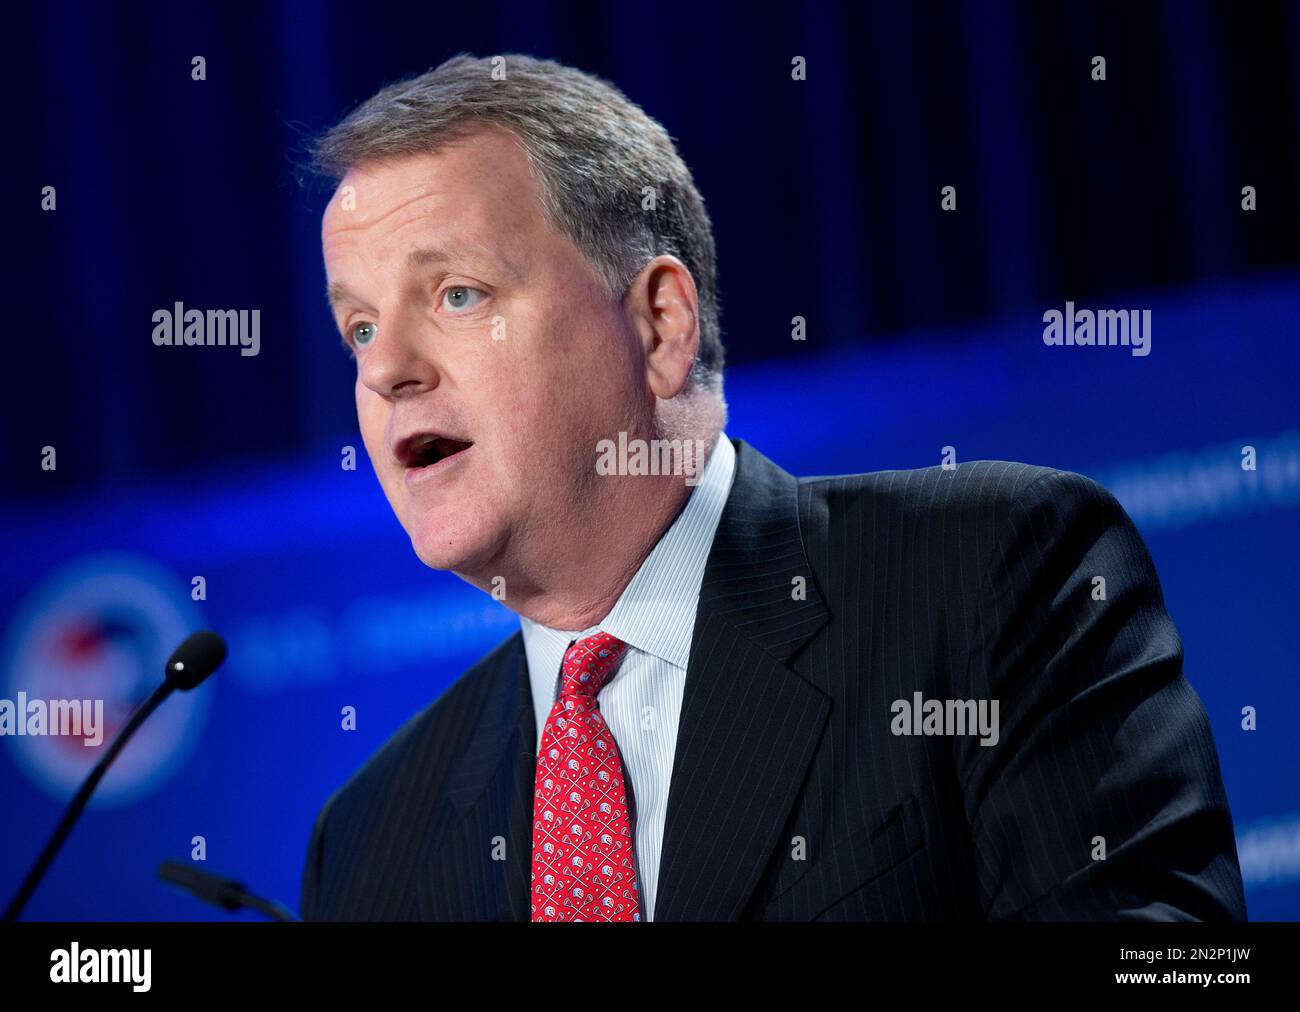 W. Douglas Parker, CEO, American Airlines Group, speaks at the 14th Annual Aviation Summit in Washington, Tuesday, March 17, 2015. (AP Photo/Pablo Martinez Monsivais) Stock Photo